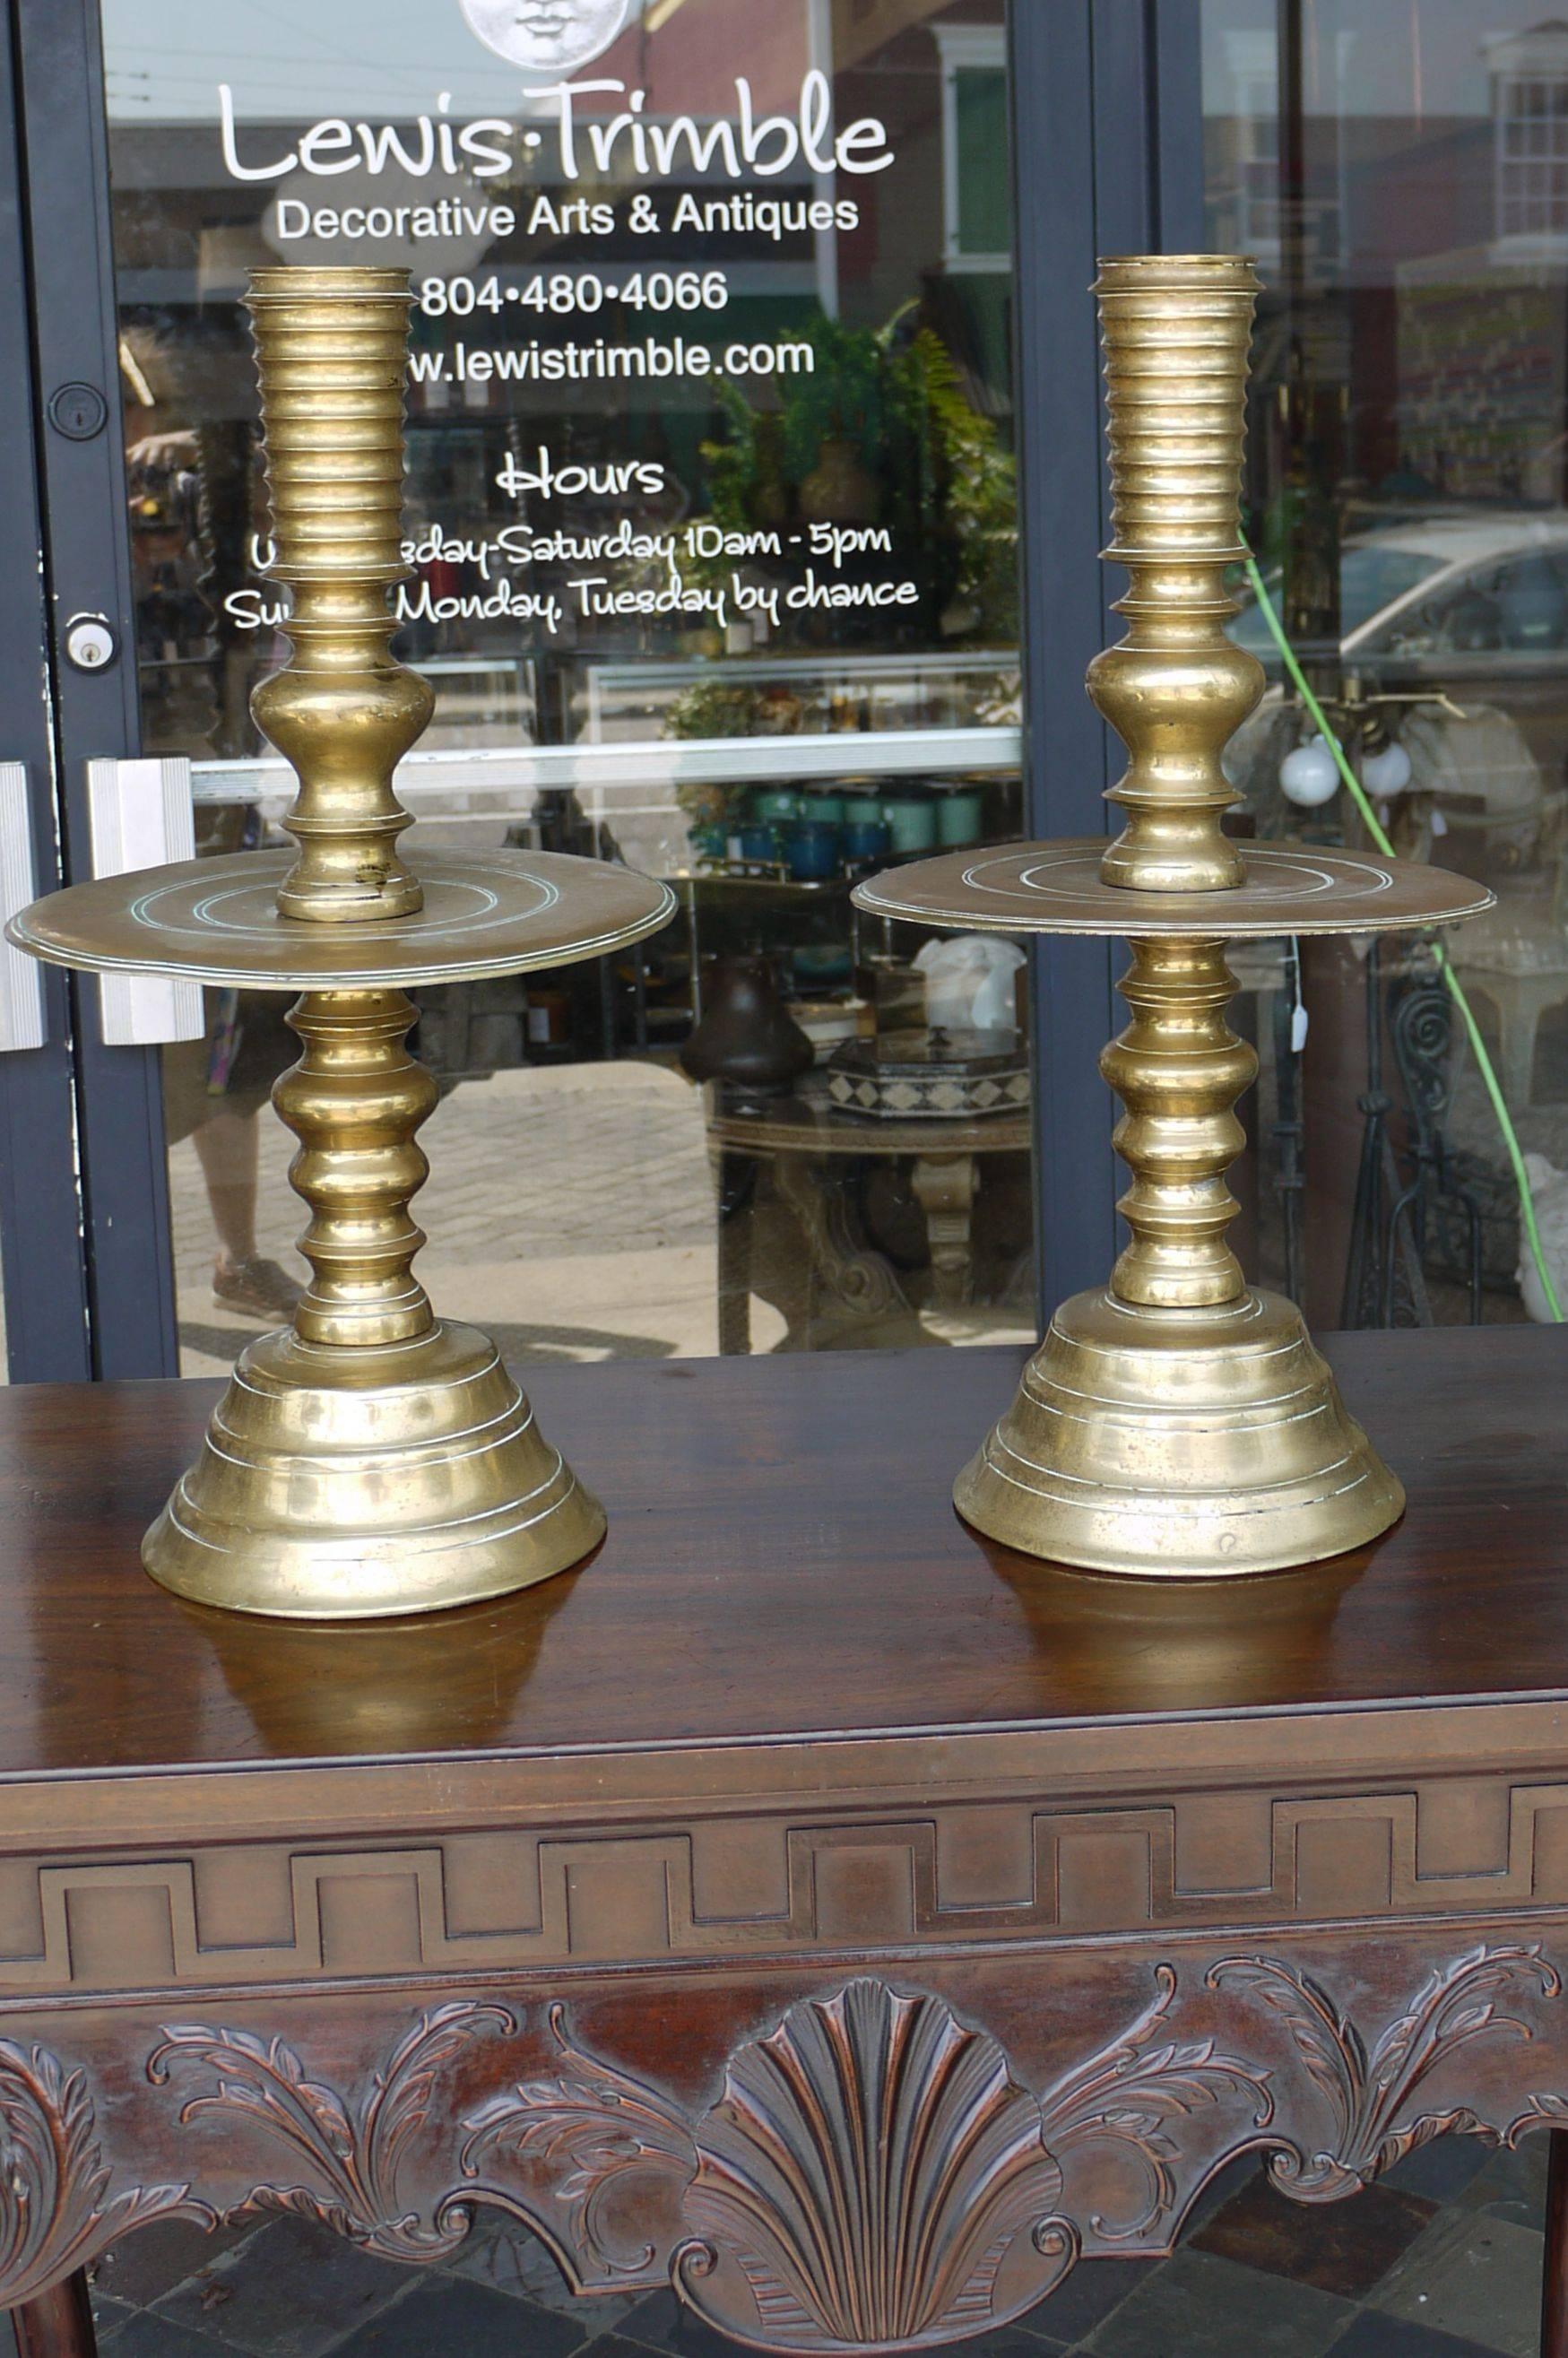 Massive pair of early 19th century English candlesticks.